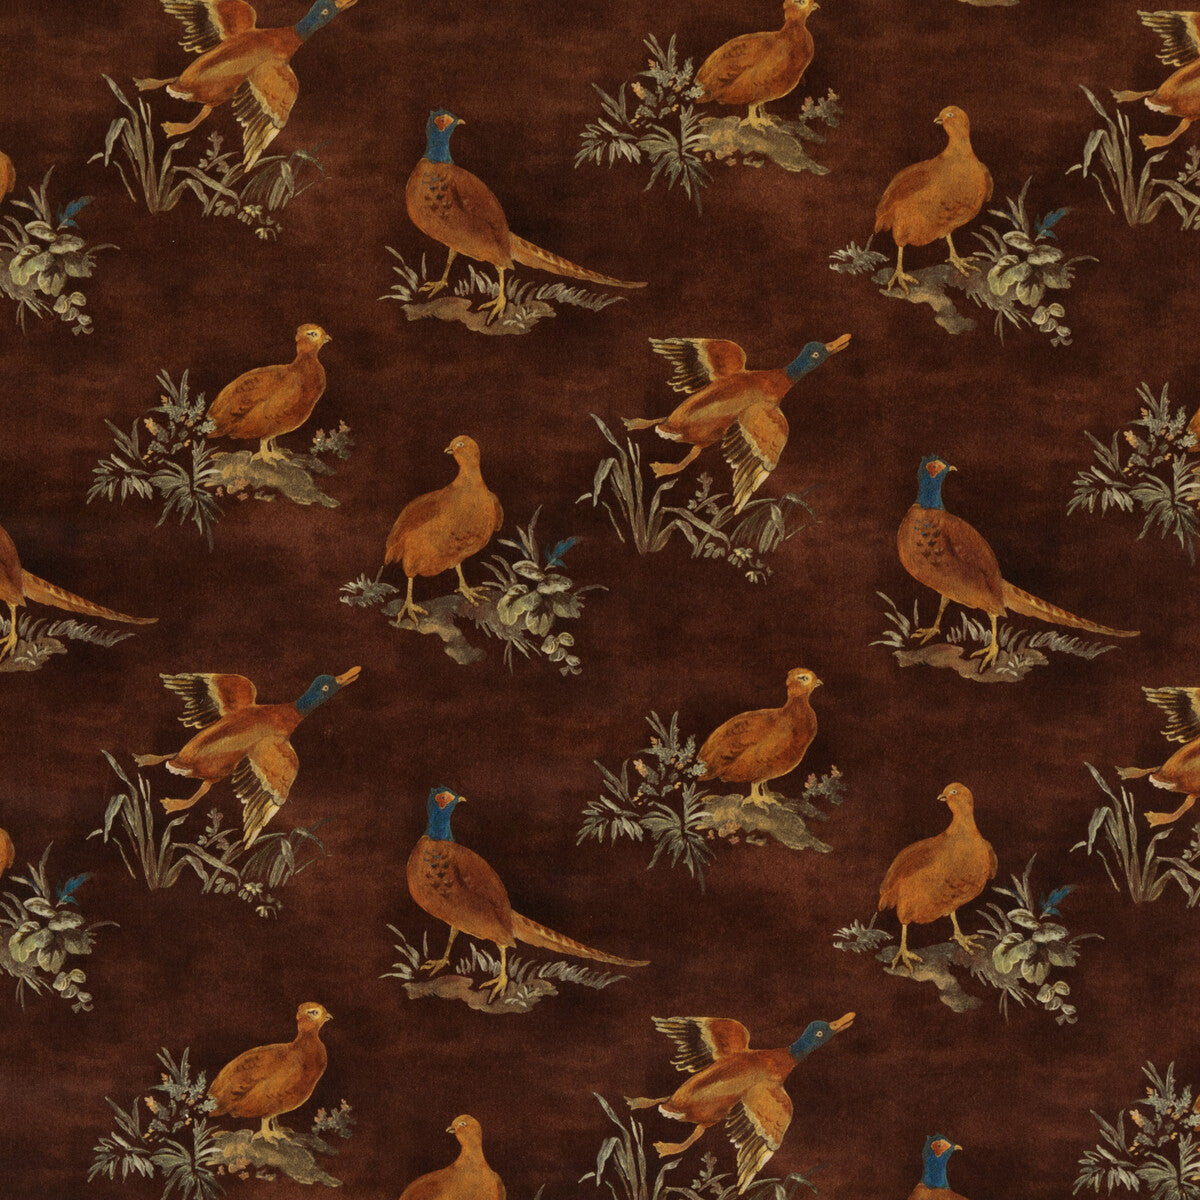 Game Show fabric in spice color - pattern FD316.T30.0 - by Mulberry in the Modern Country Velvets collection